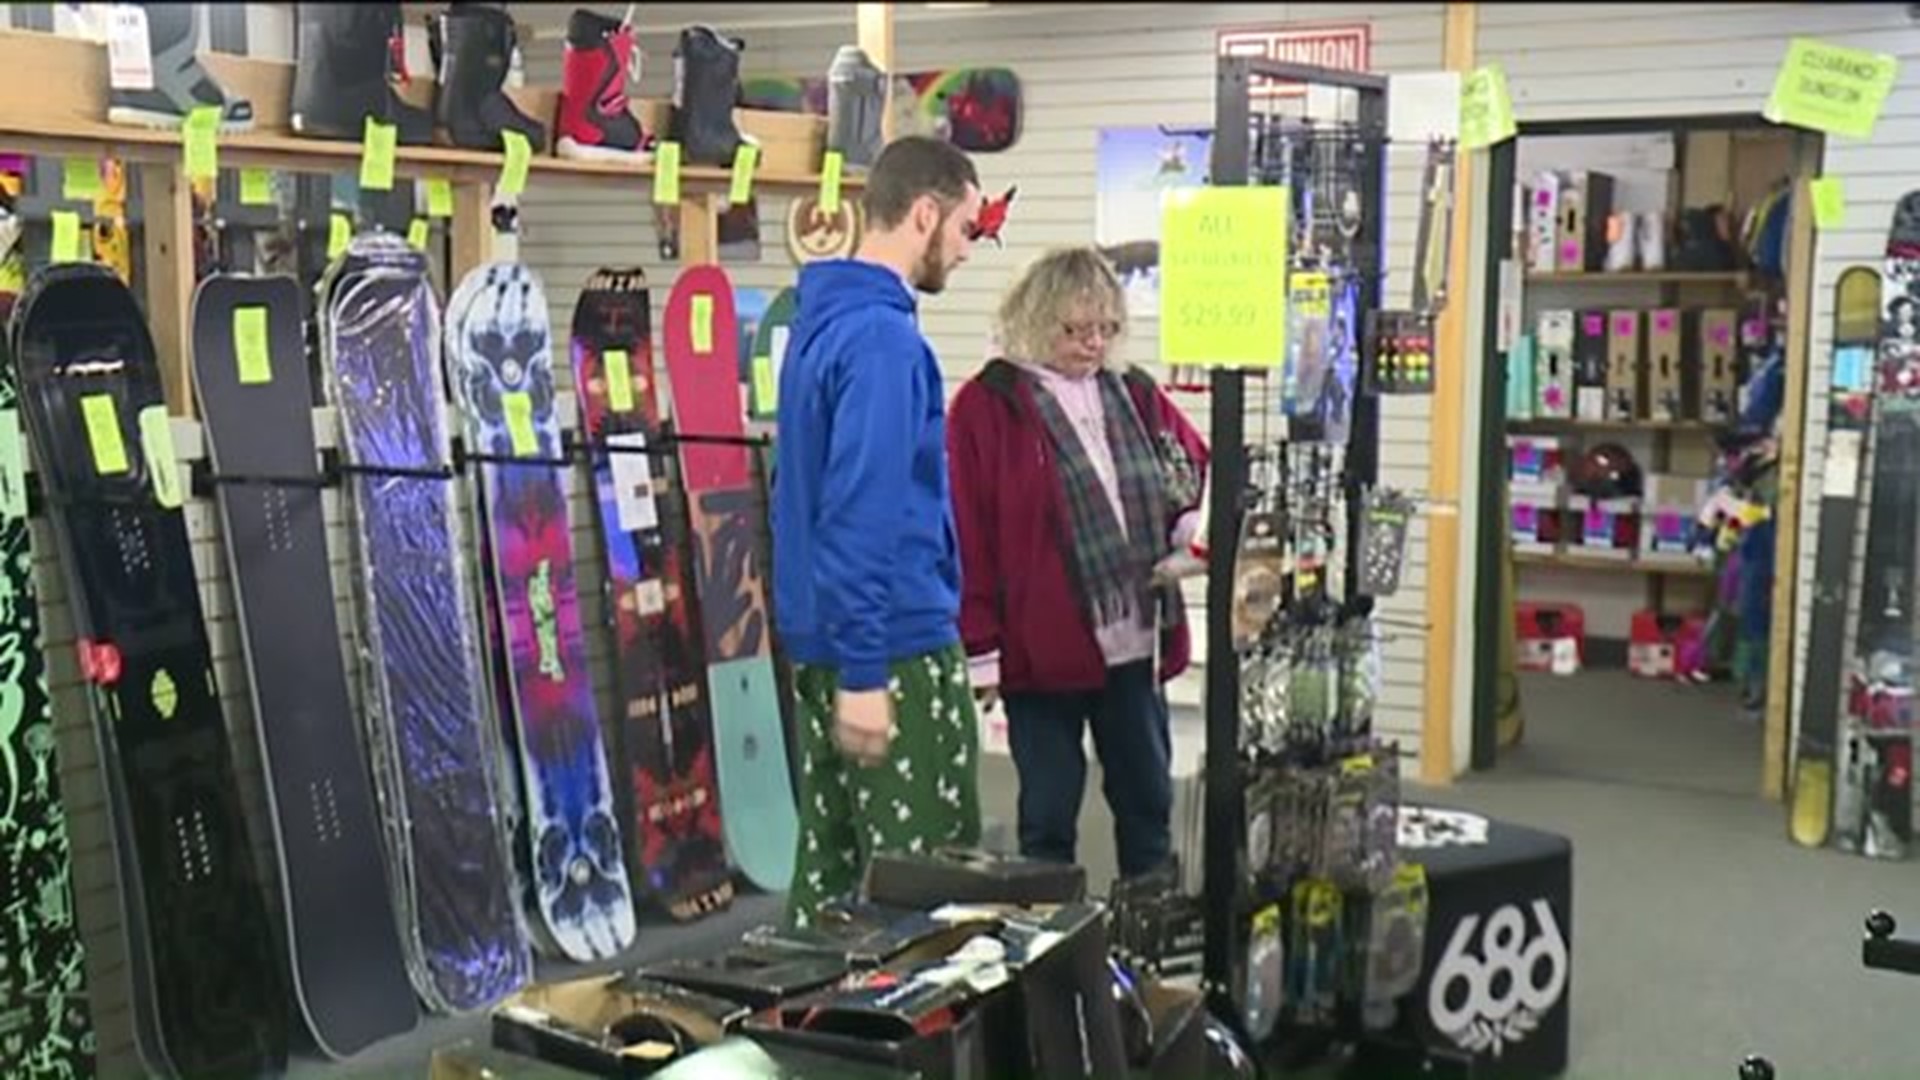 Blizzard Brings Winter Windfall to Ski Shops